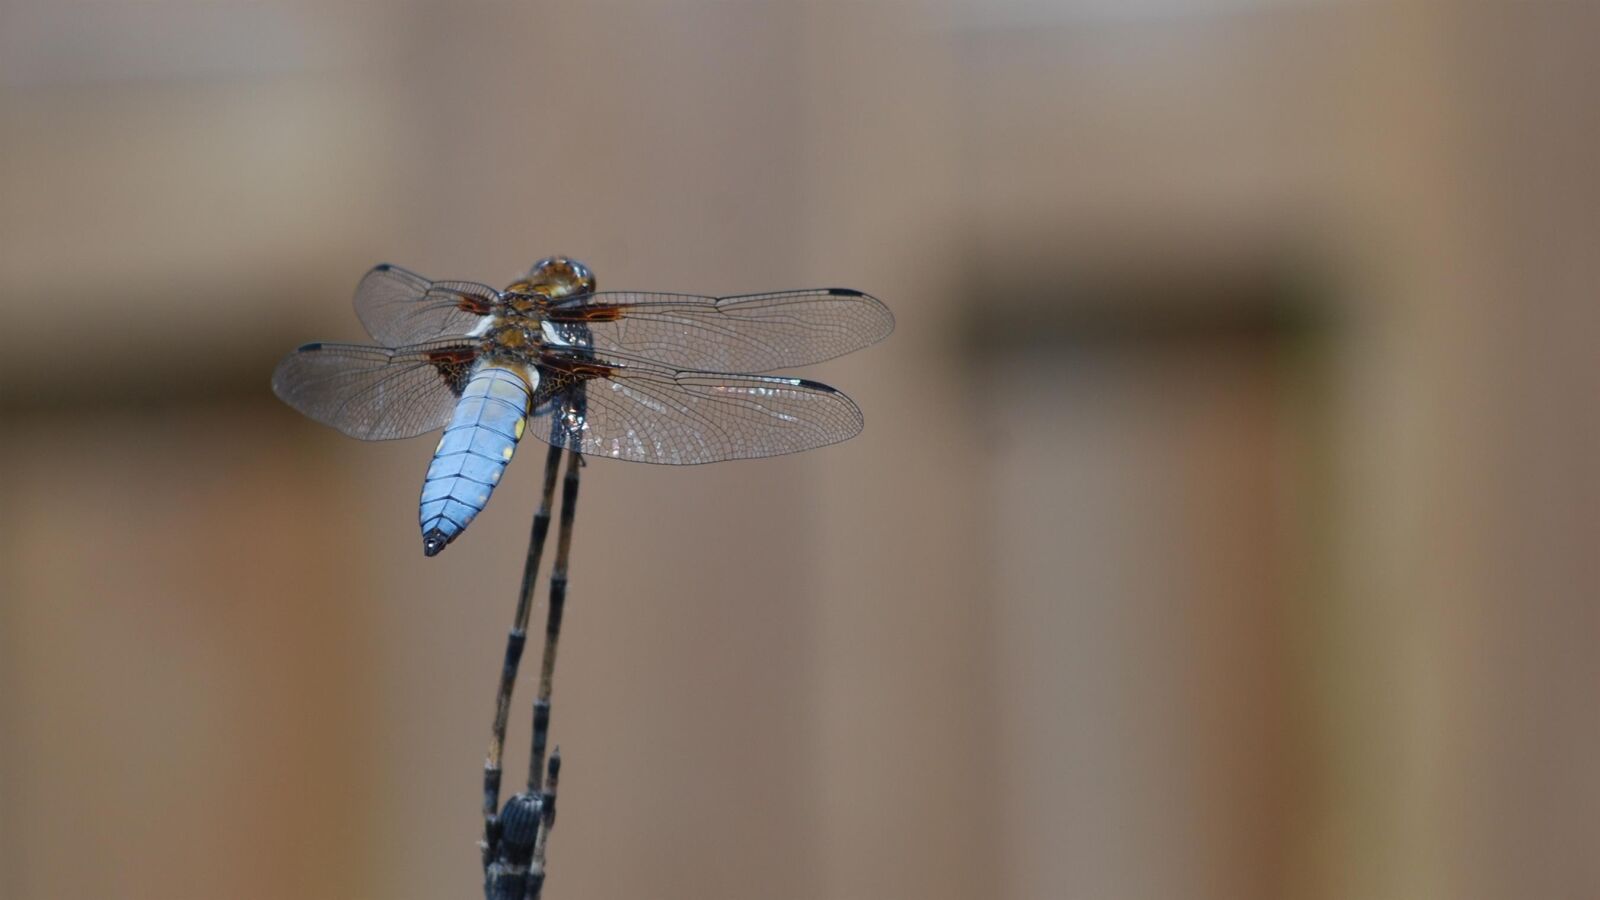 Nikon D80 sample photo. Dragonfly, insects, nature photography